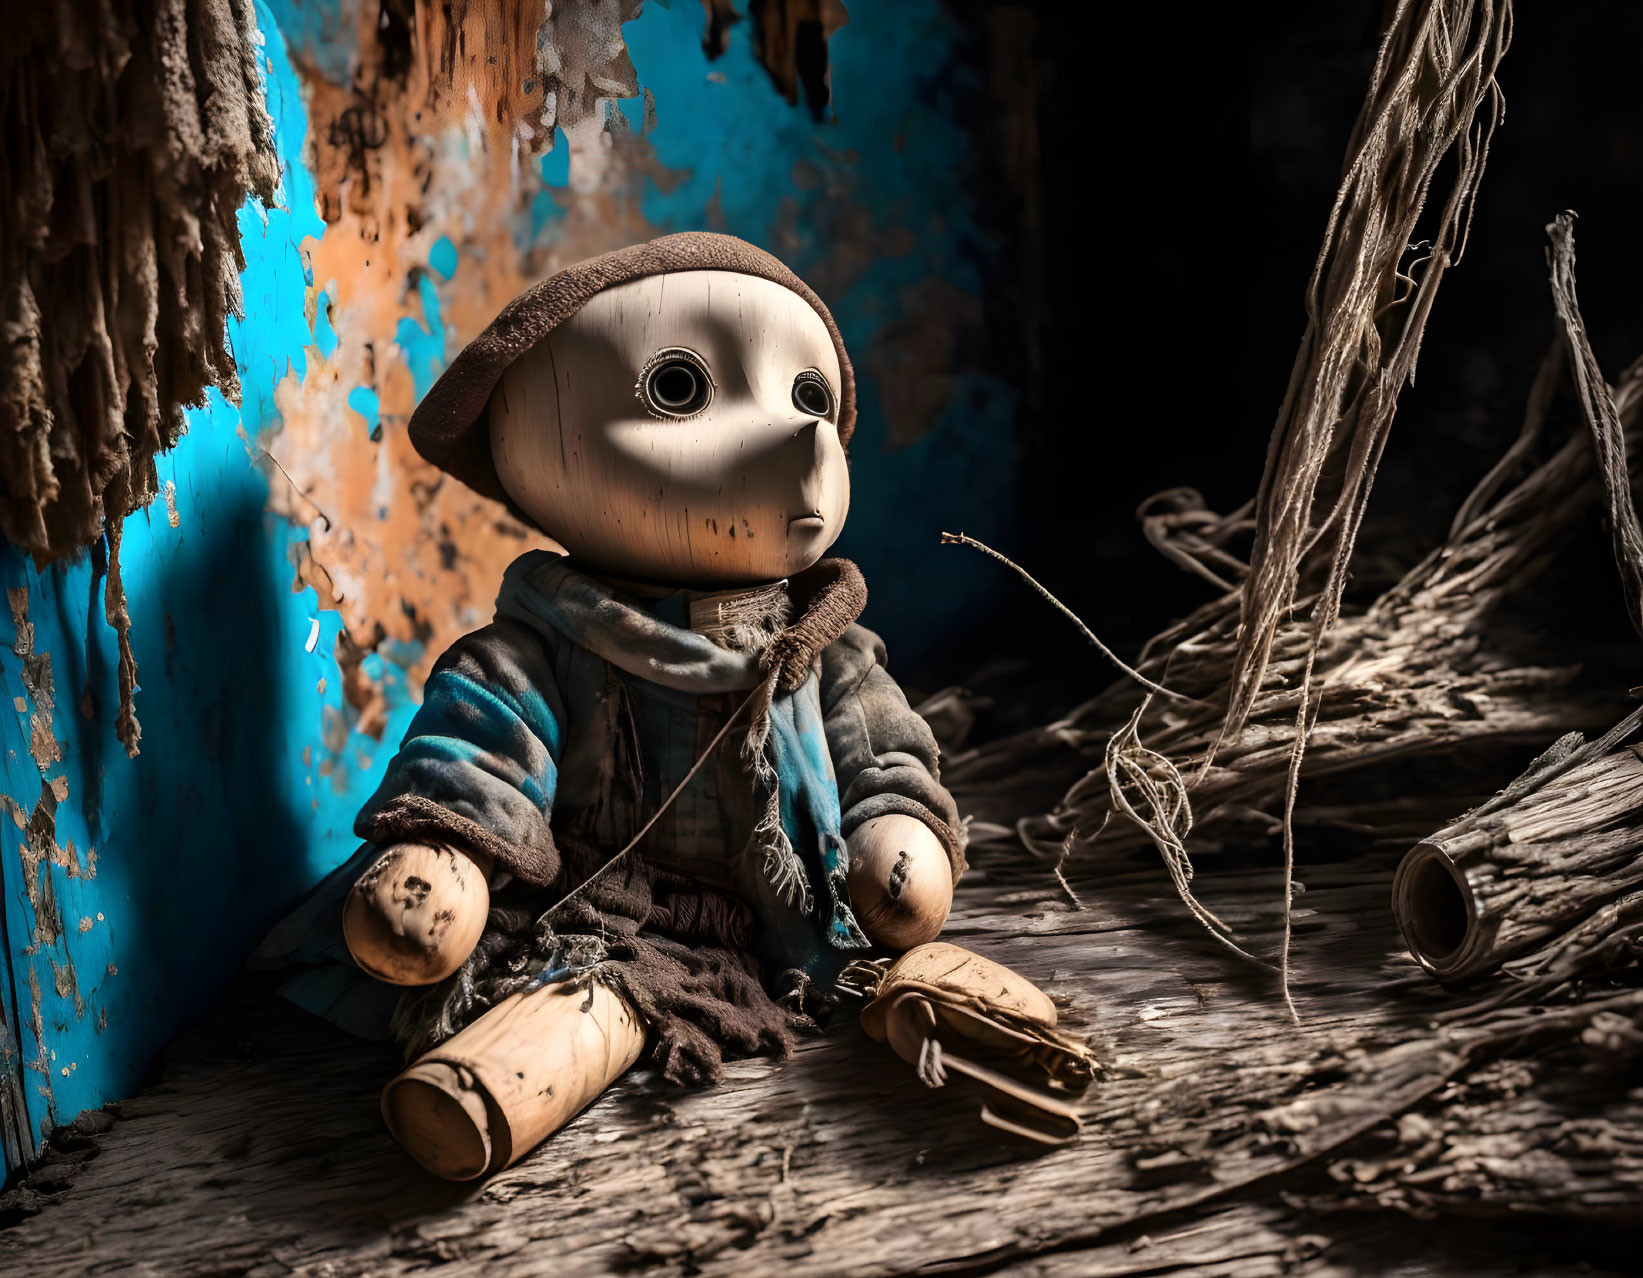 Vintage-style figurine in rustic attire on wooden planks amidst tattered fabric.